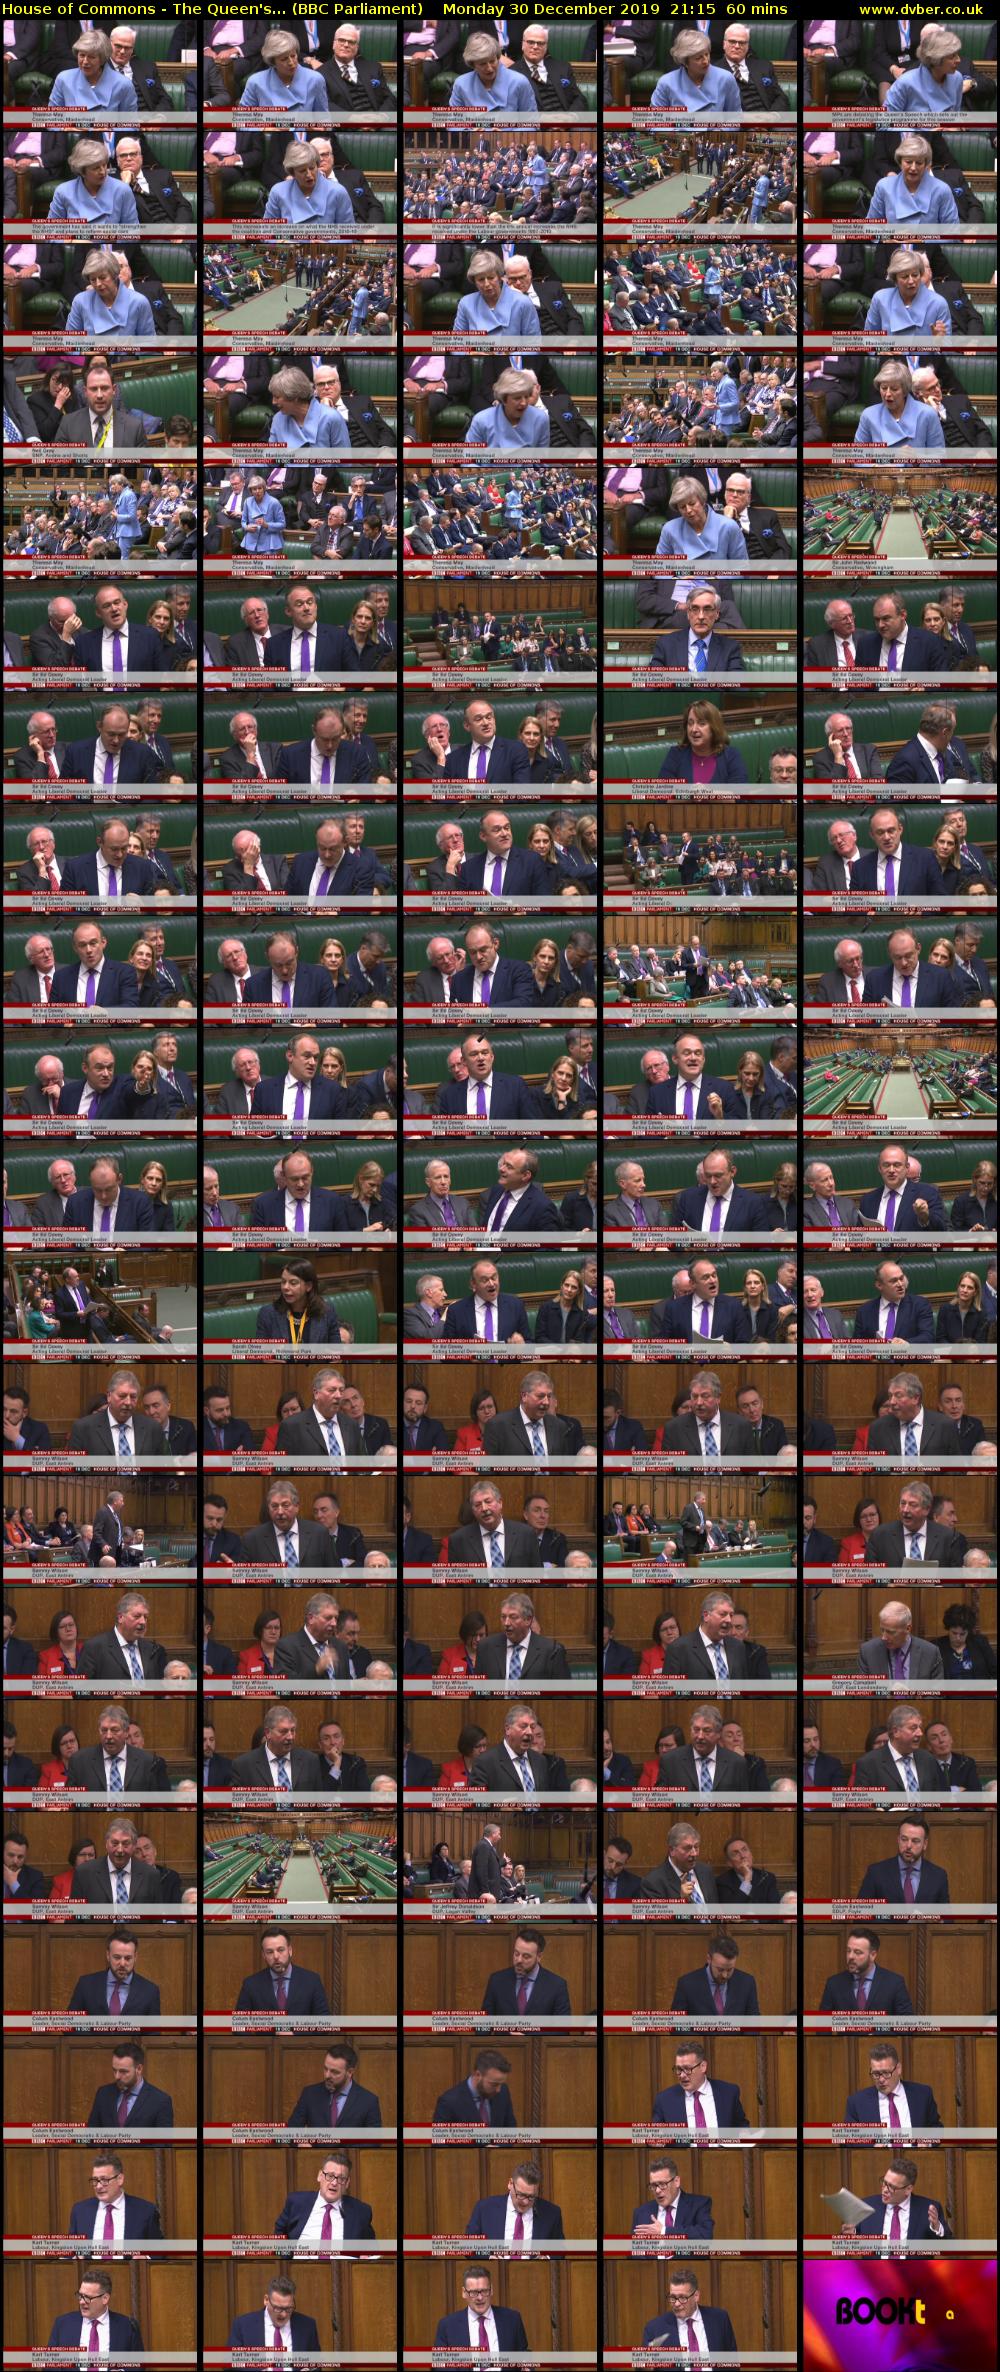 House of Commons - The Queen's... (BBC Parliament) Monday 30 December 2019 21:15 - 22:15